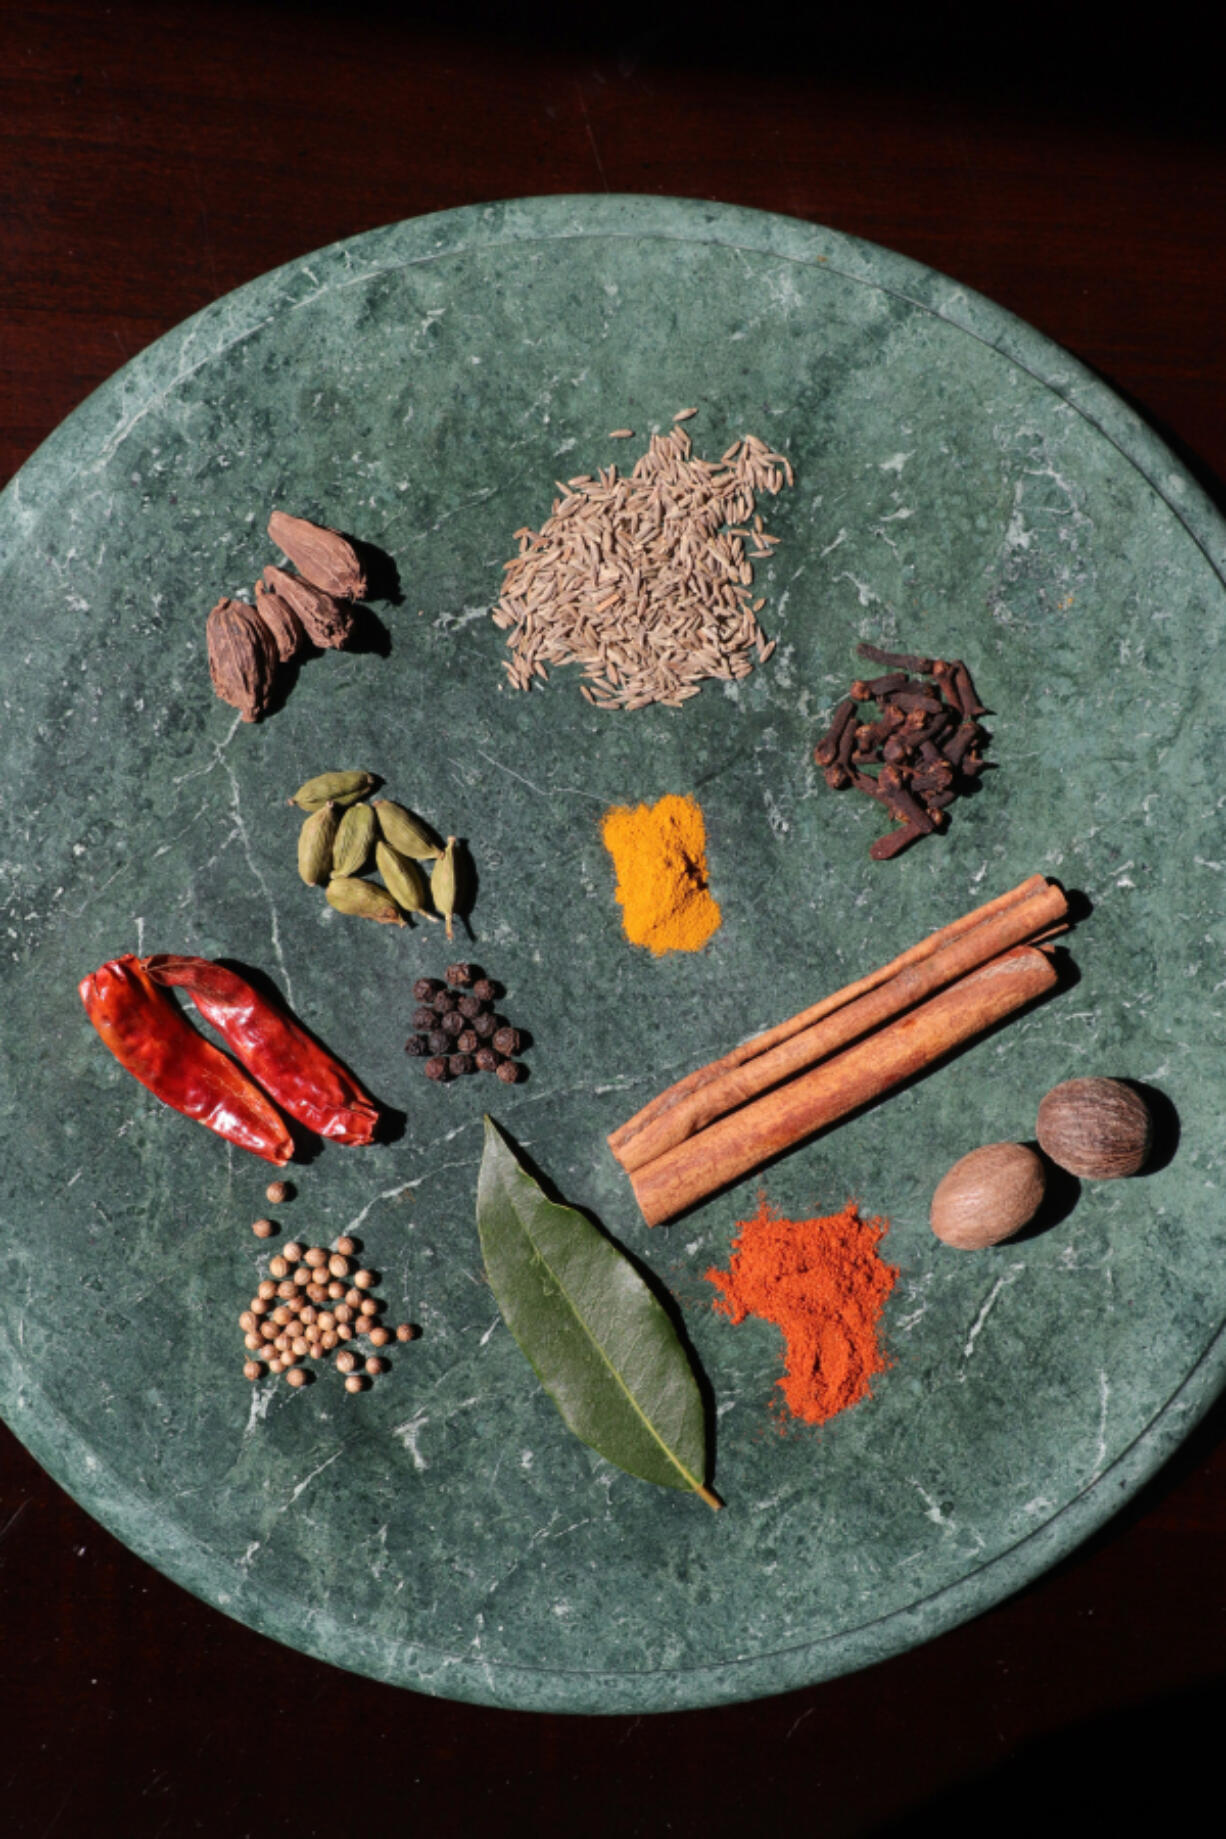 Curry comes from different regions of the world and can be made with ingredients such as: top, from left: black cardamom pods, cumin seeds; second row: green cardamom pods, ground turmeric, cloves; third row: dried red peppers, black peppercorns, cinnamon sticks; fourth row: coriander seeds, bay leaf, paprika, nutmeg. (Photos by Hillary Levin/St.